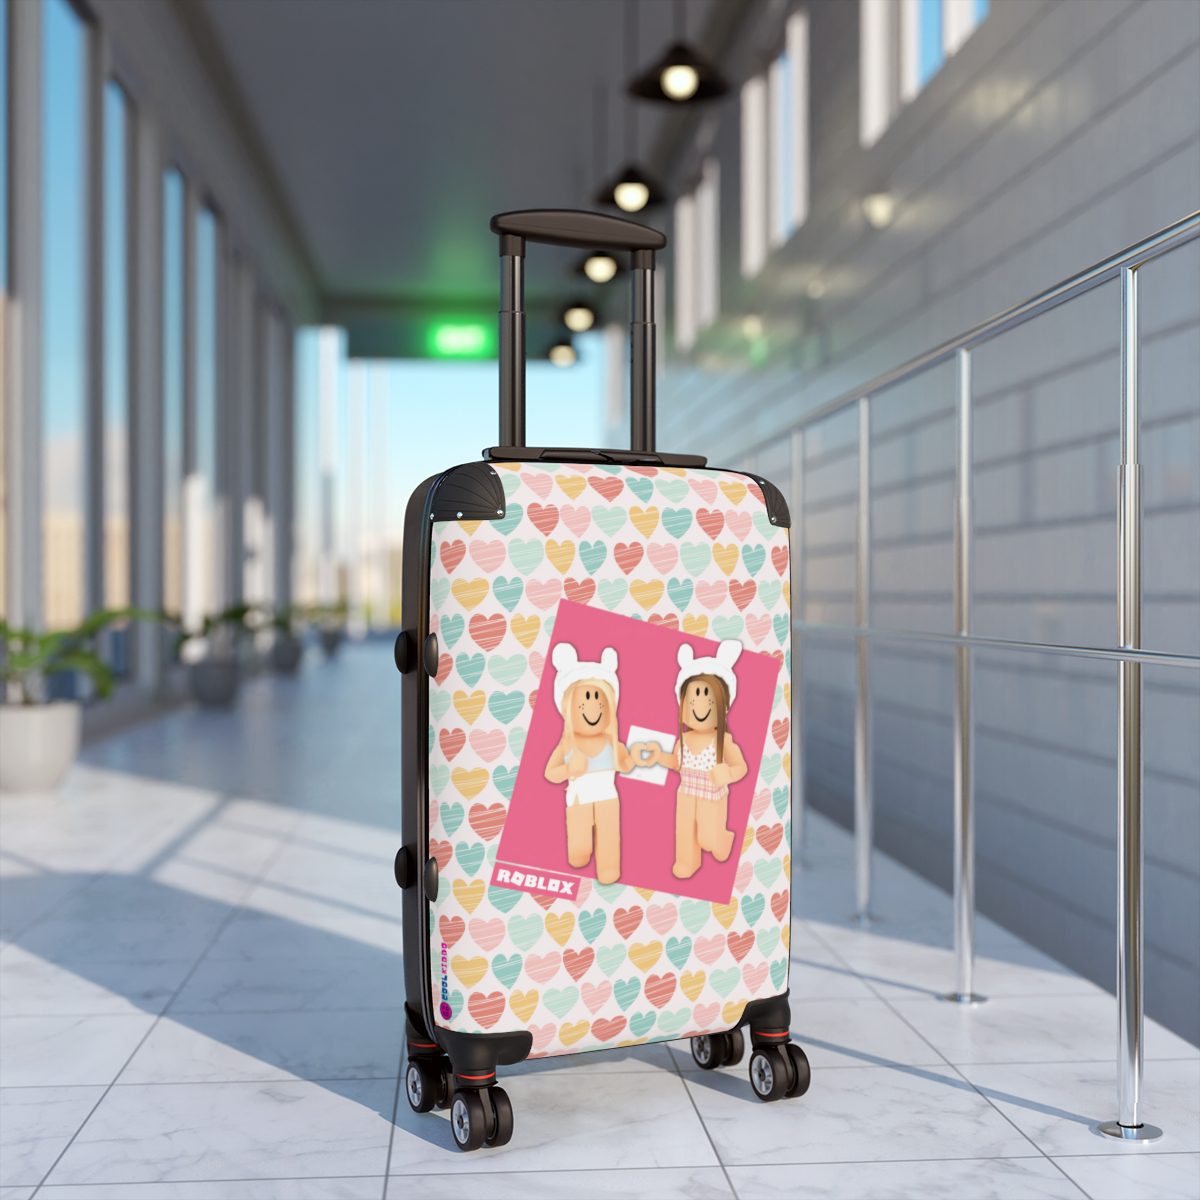 Roblox Girl’s Pastel Colors Hearts Adventure Companion: Carry-On Suitcase Cool Kiddo 14